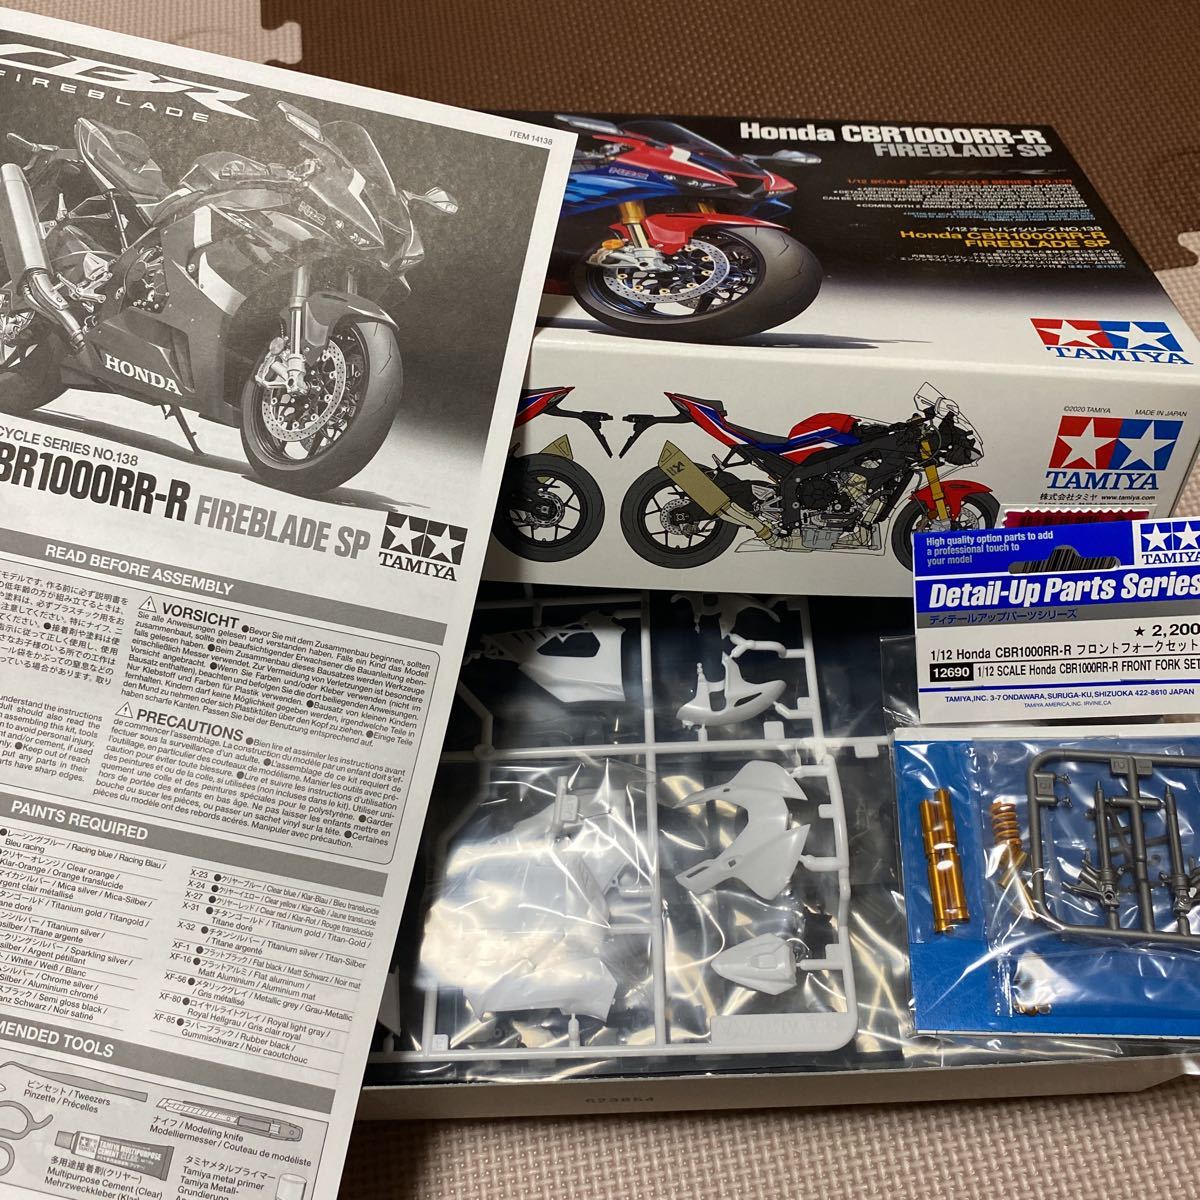  Tamiya 1/12 motorcycle series No.138 Honda CBR 1000RR-R FIREBLADE SP 14138 not yet constructed +ti tail up parts front fork 